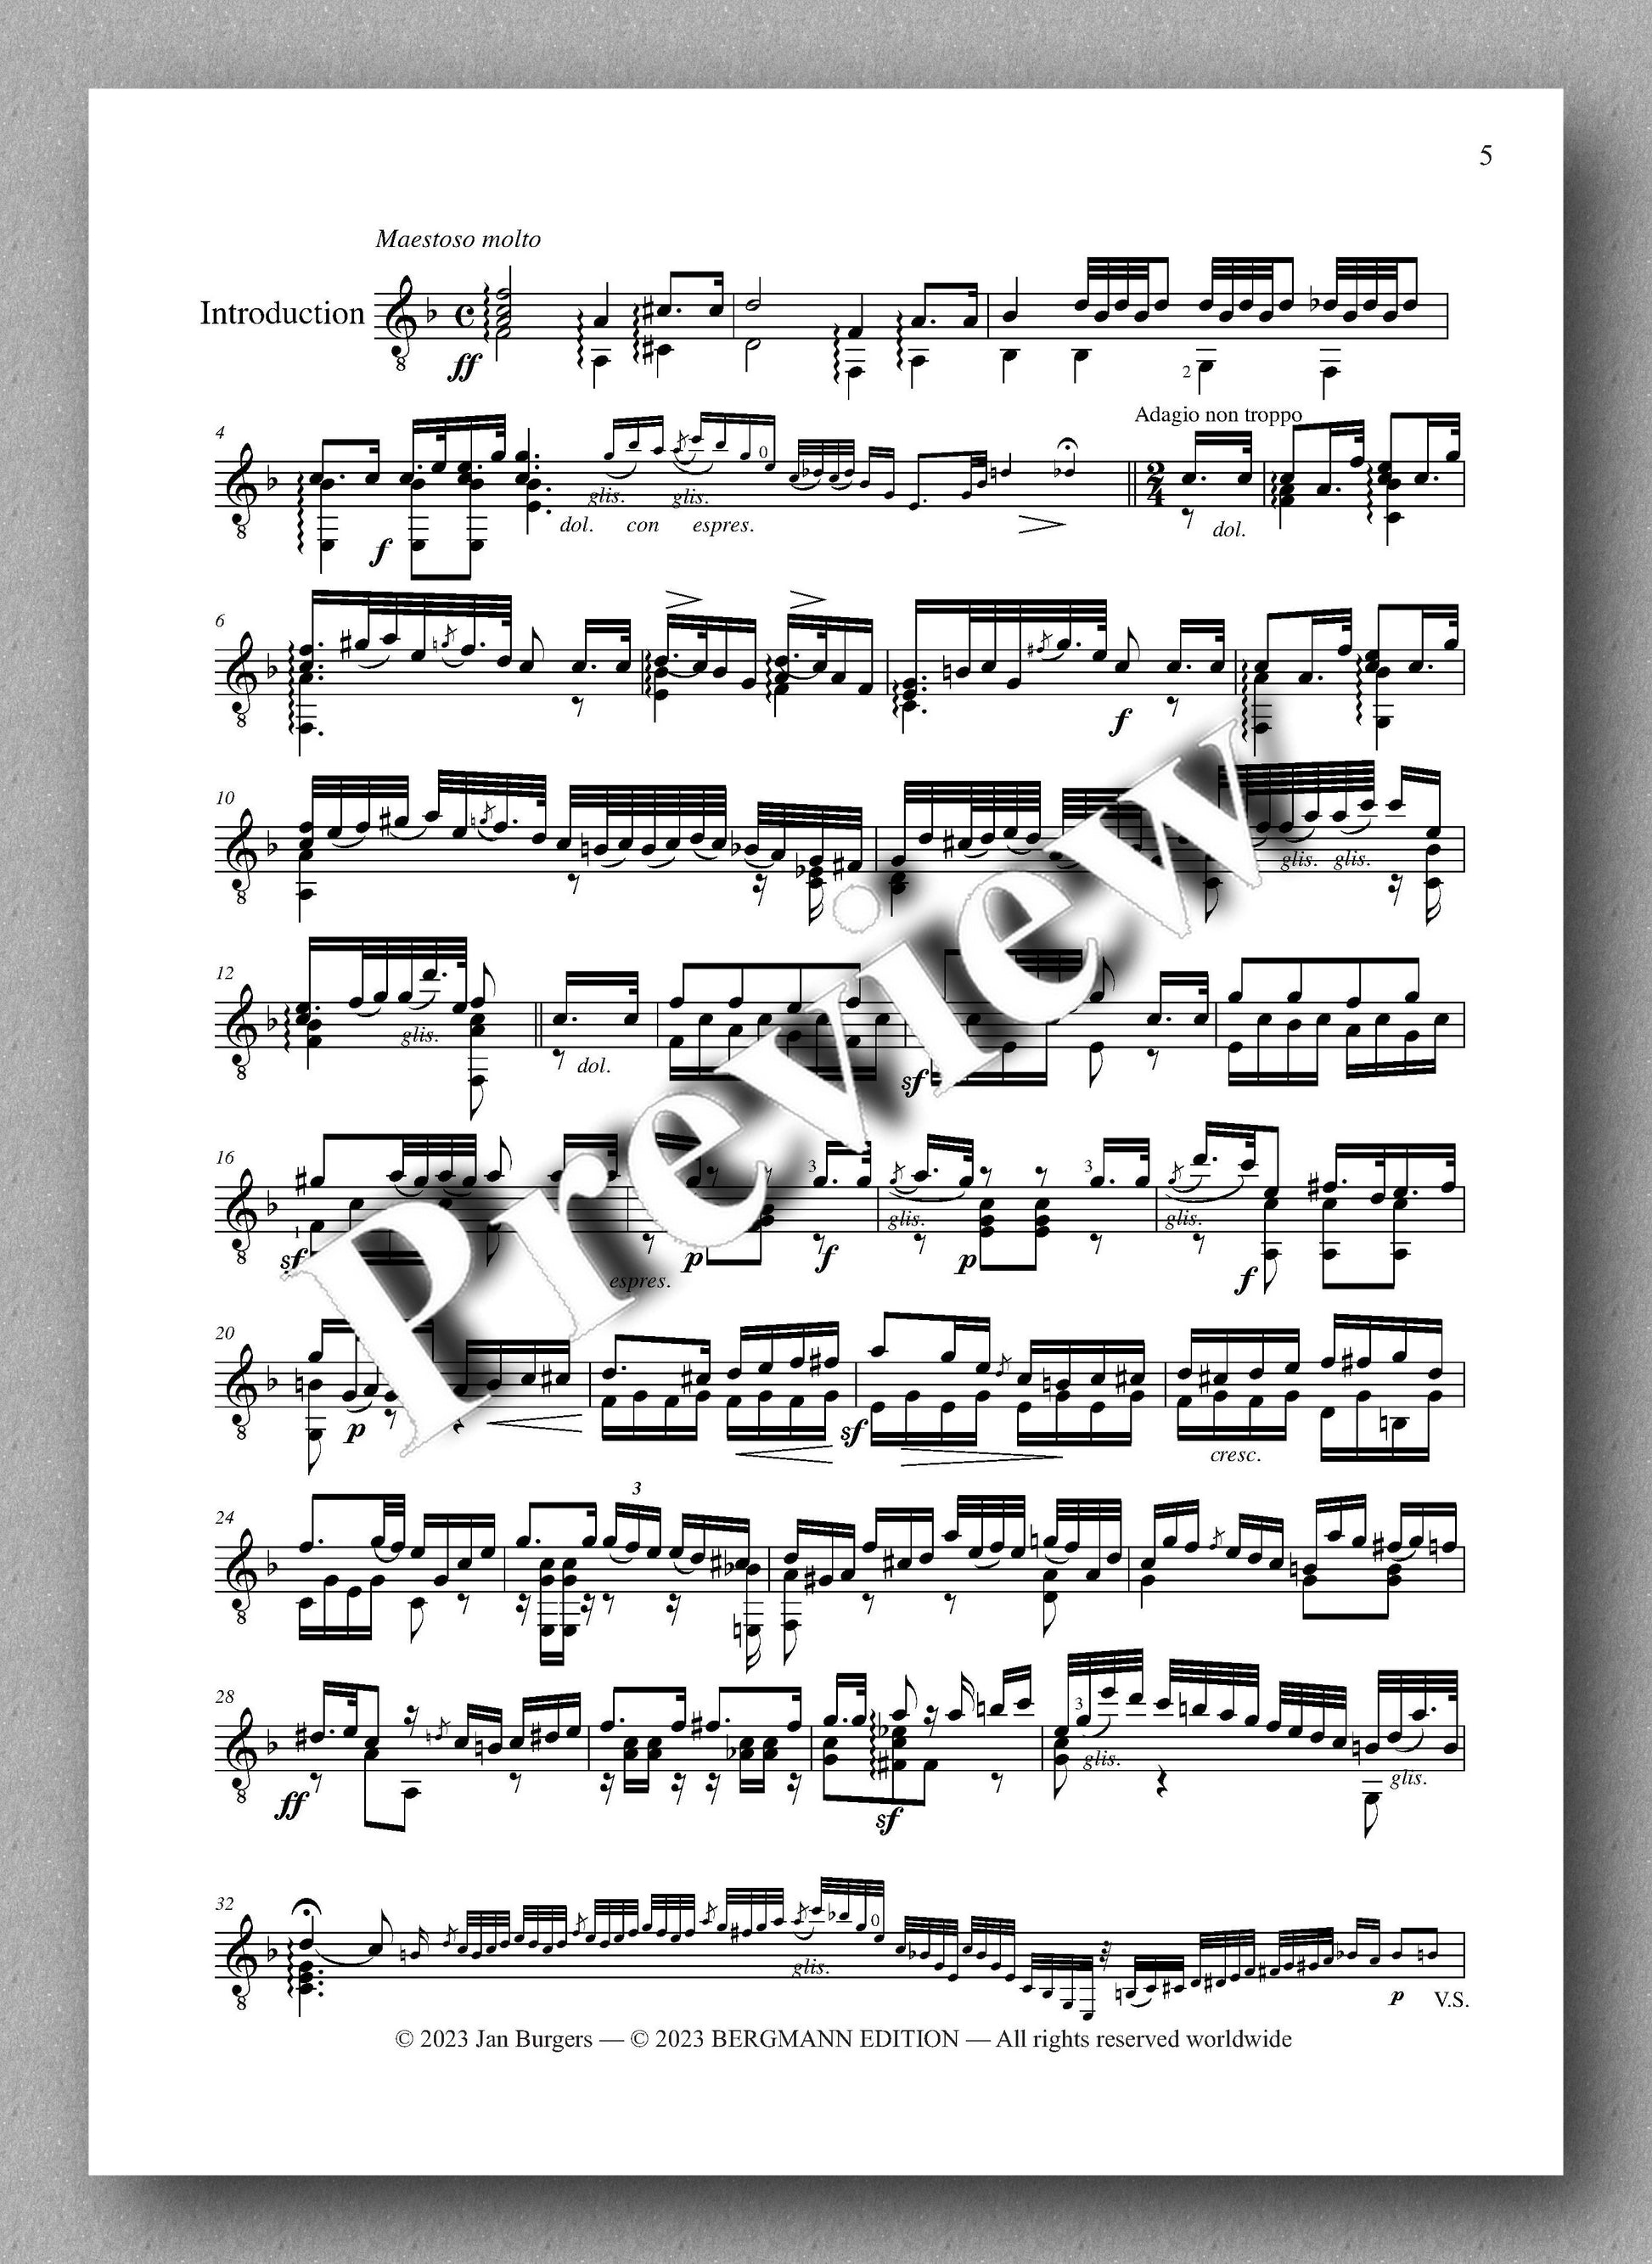 Molino, Collected Works for Guitar Solo, Vol. 40 - preview of the music score 1